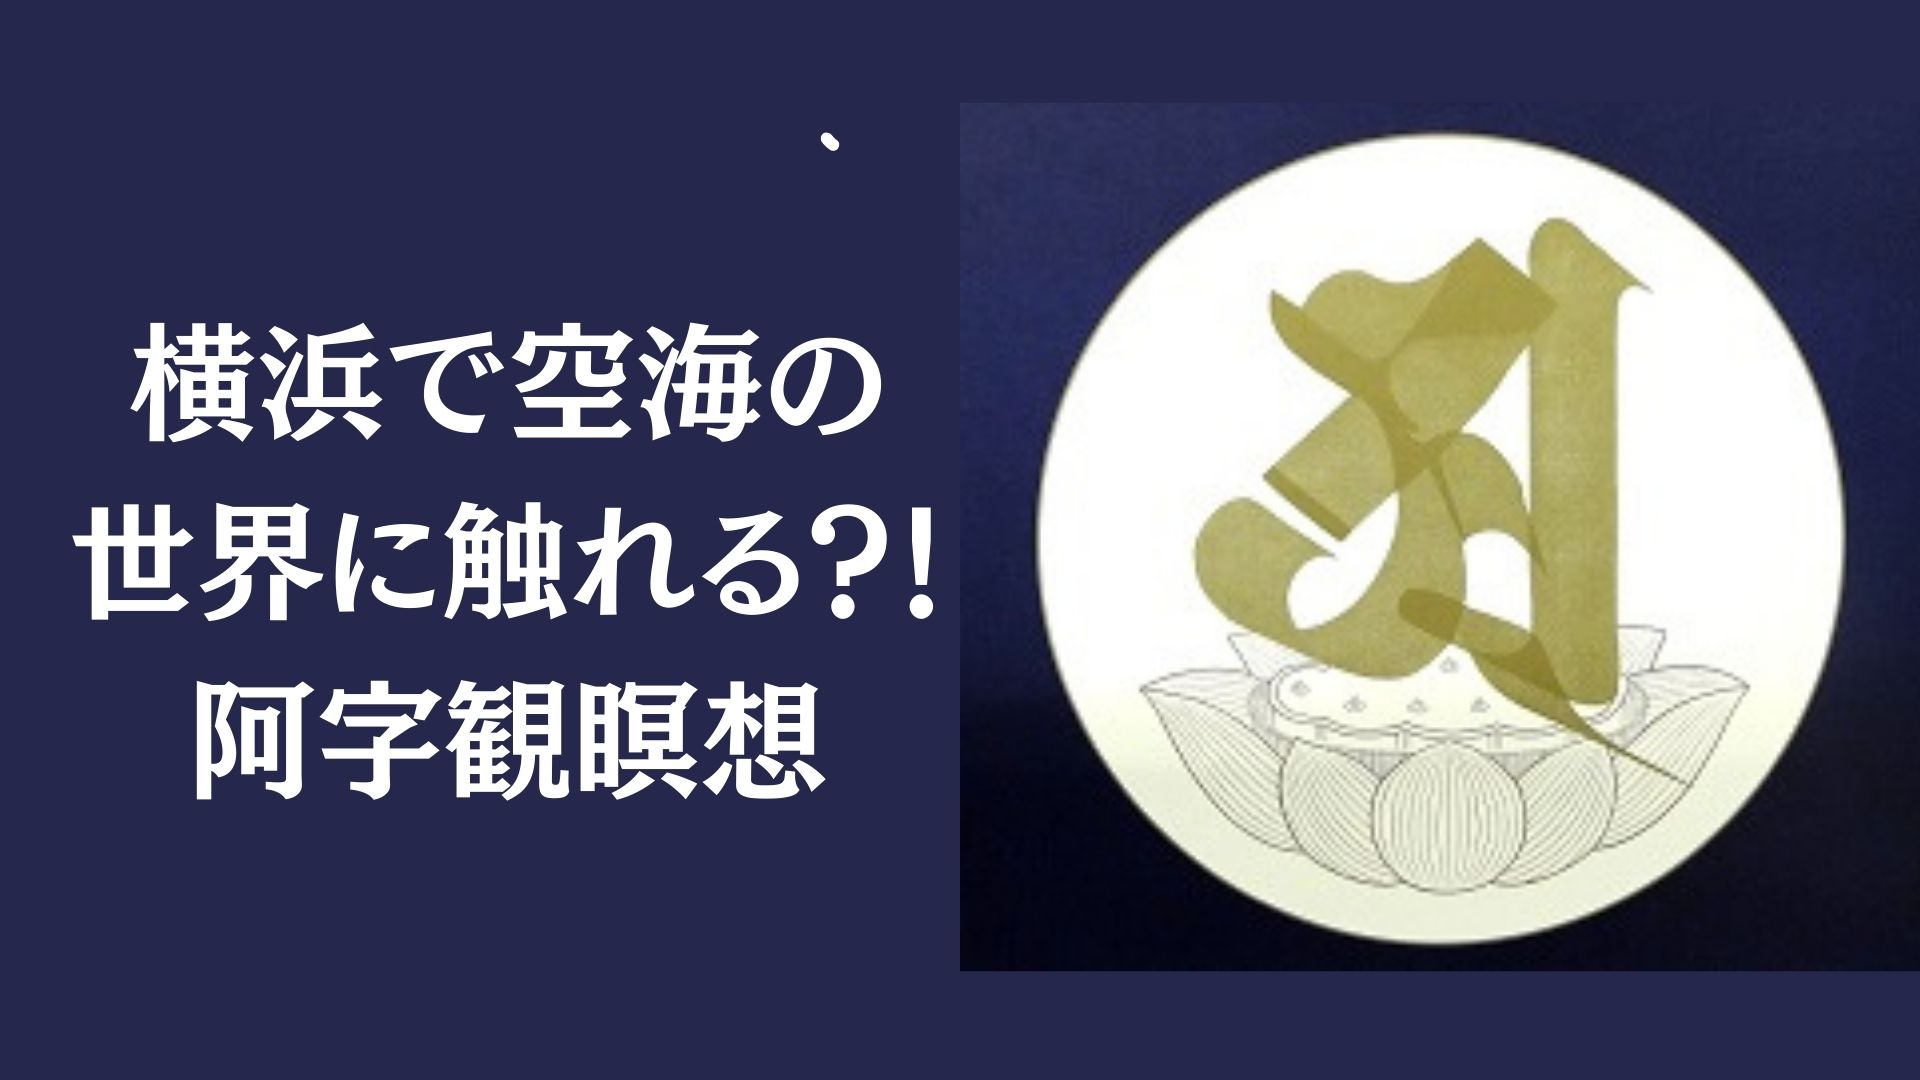 Read more about the article 横浜で空海の世界に触れる！？～阿字観瞑想を体験してみた～